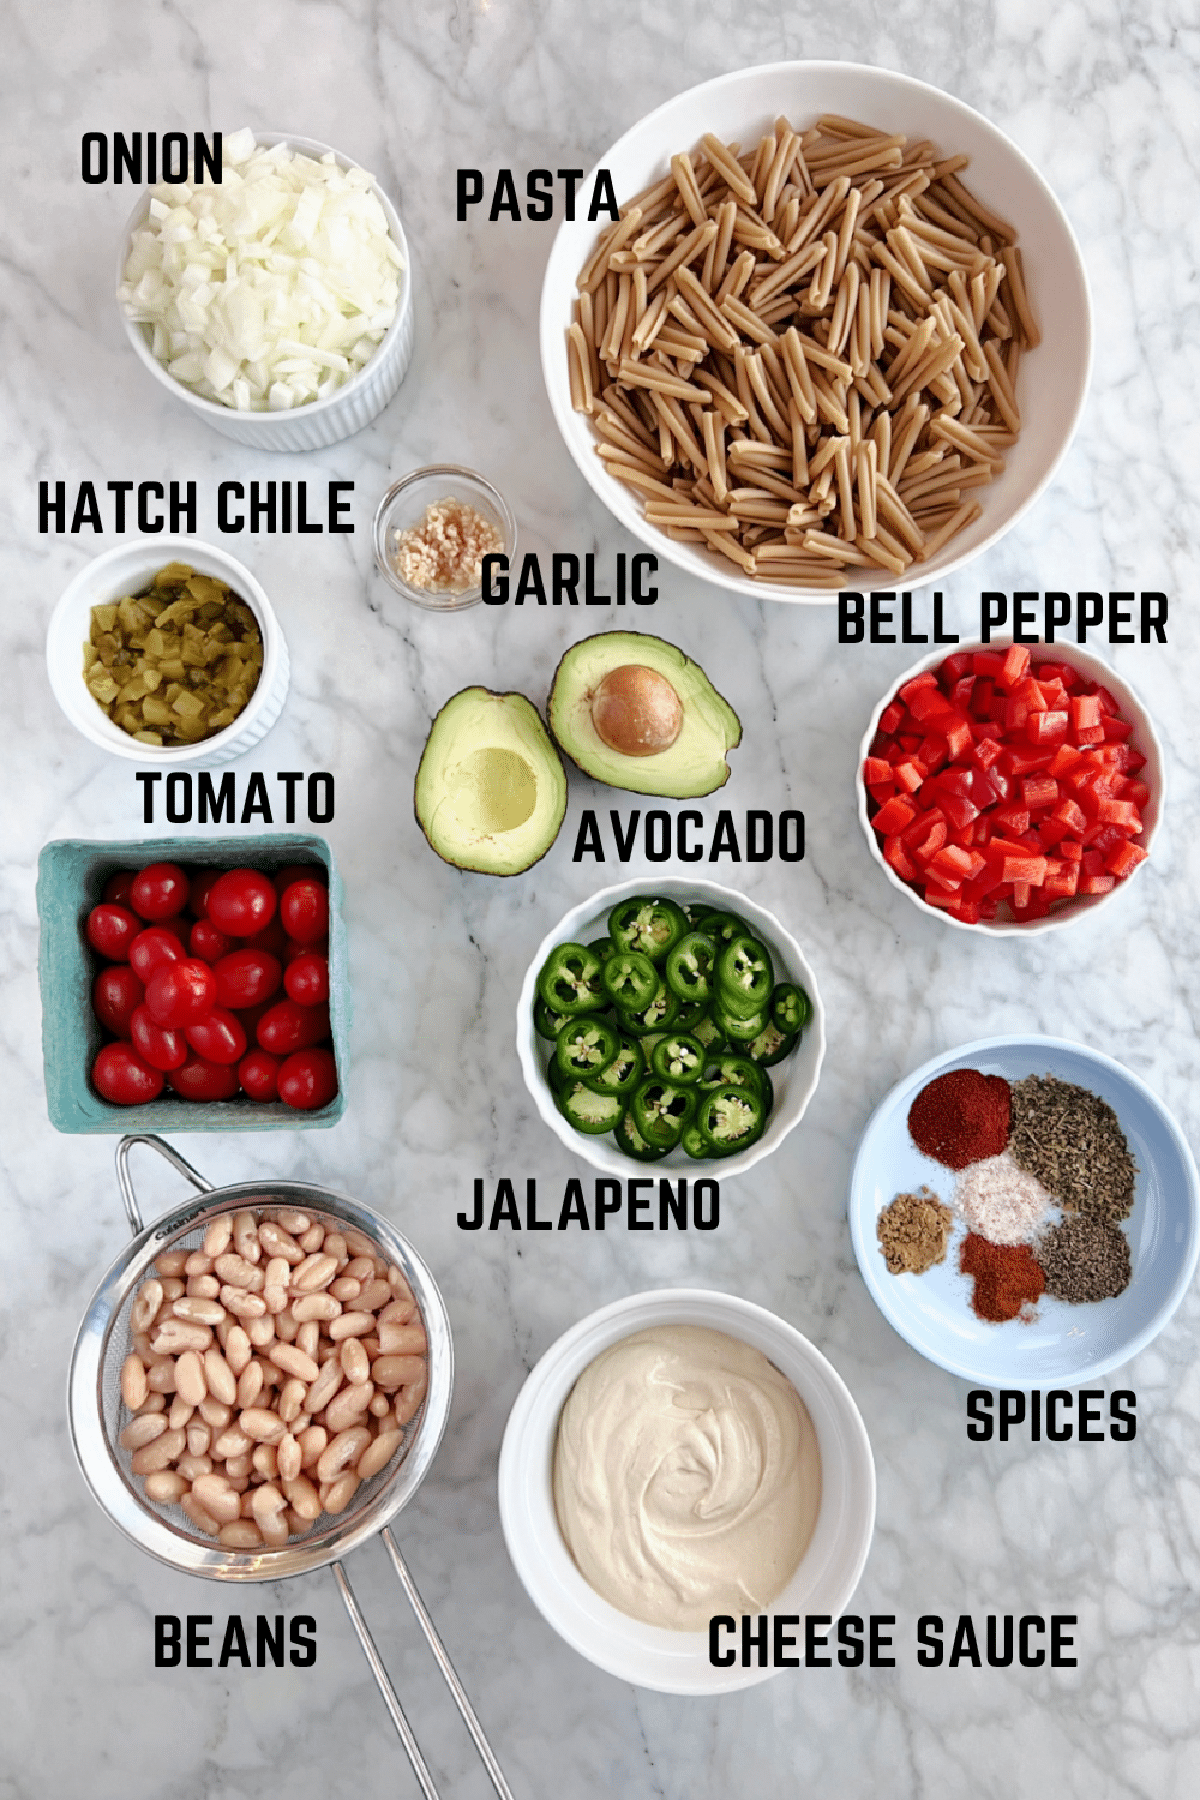 Overhead view of ingredients to make spicy southwest mac and cheese: pasta, onion, garlic, Hatch chiles, tomato, jalapeno, bell pepper, avocado, beans, cheese sauce, and southwest spices.